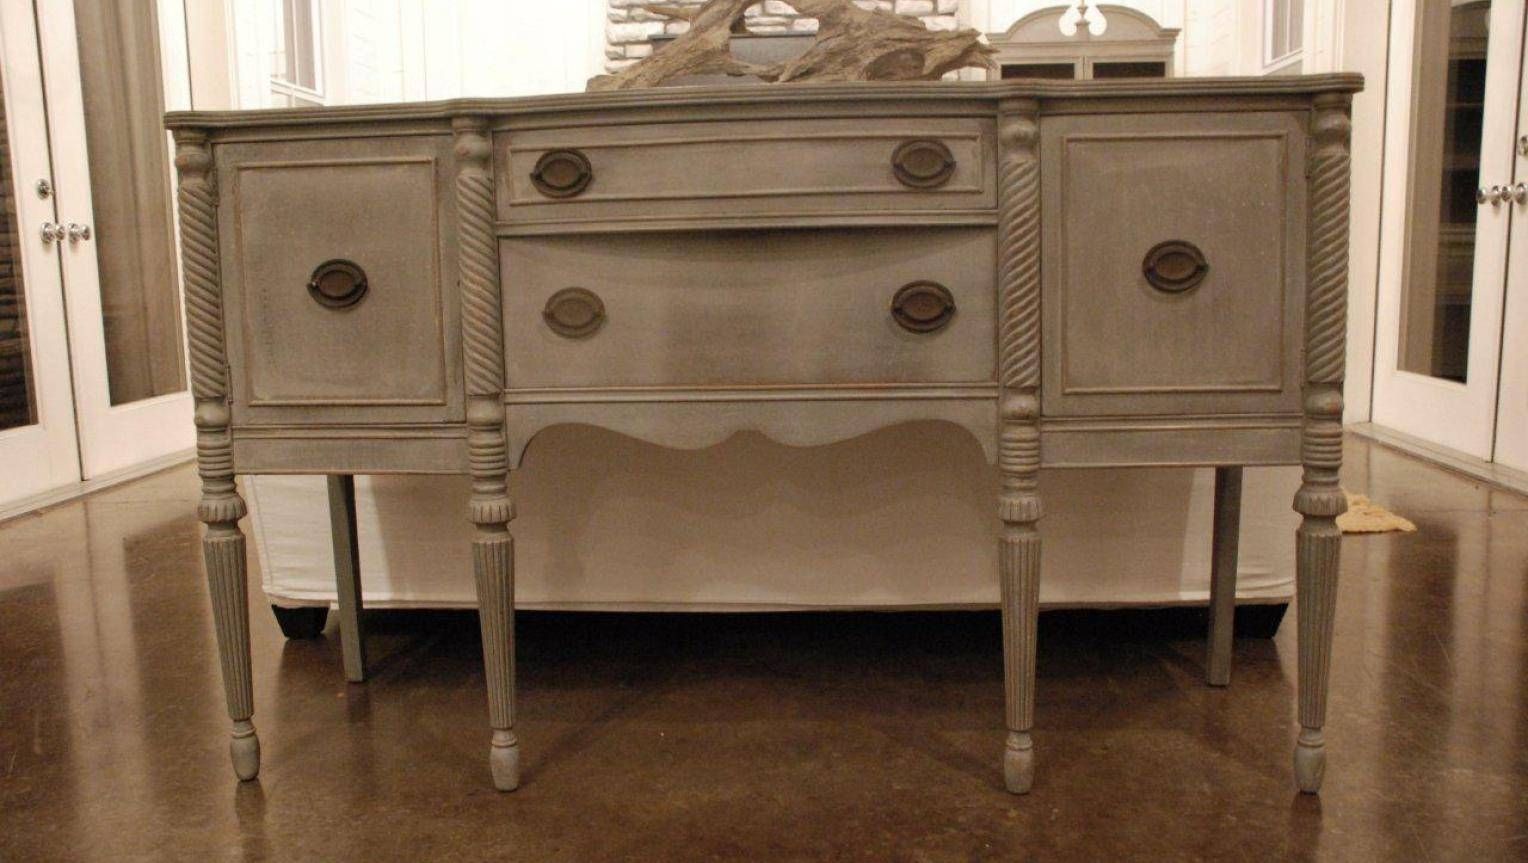 Sideboard : Distressed Sideboards Horrible Distressed White Inside Distressed Sideboards And Buffets (View 6 of 15)